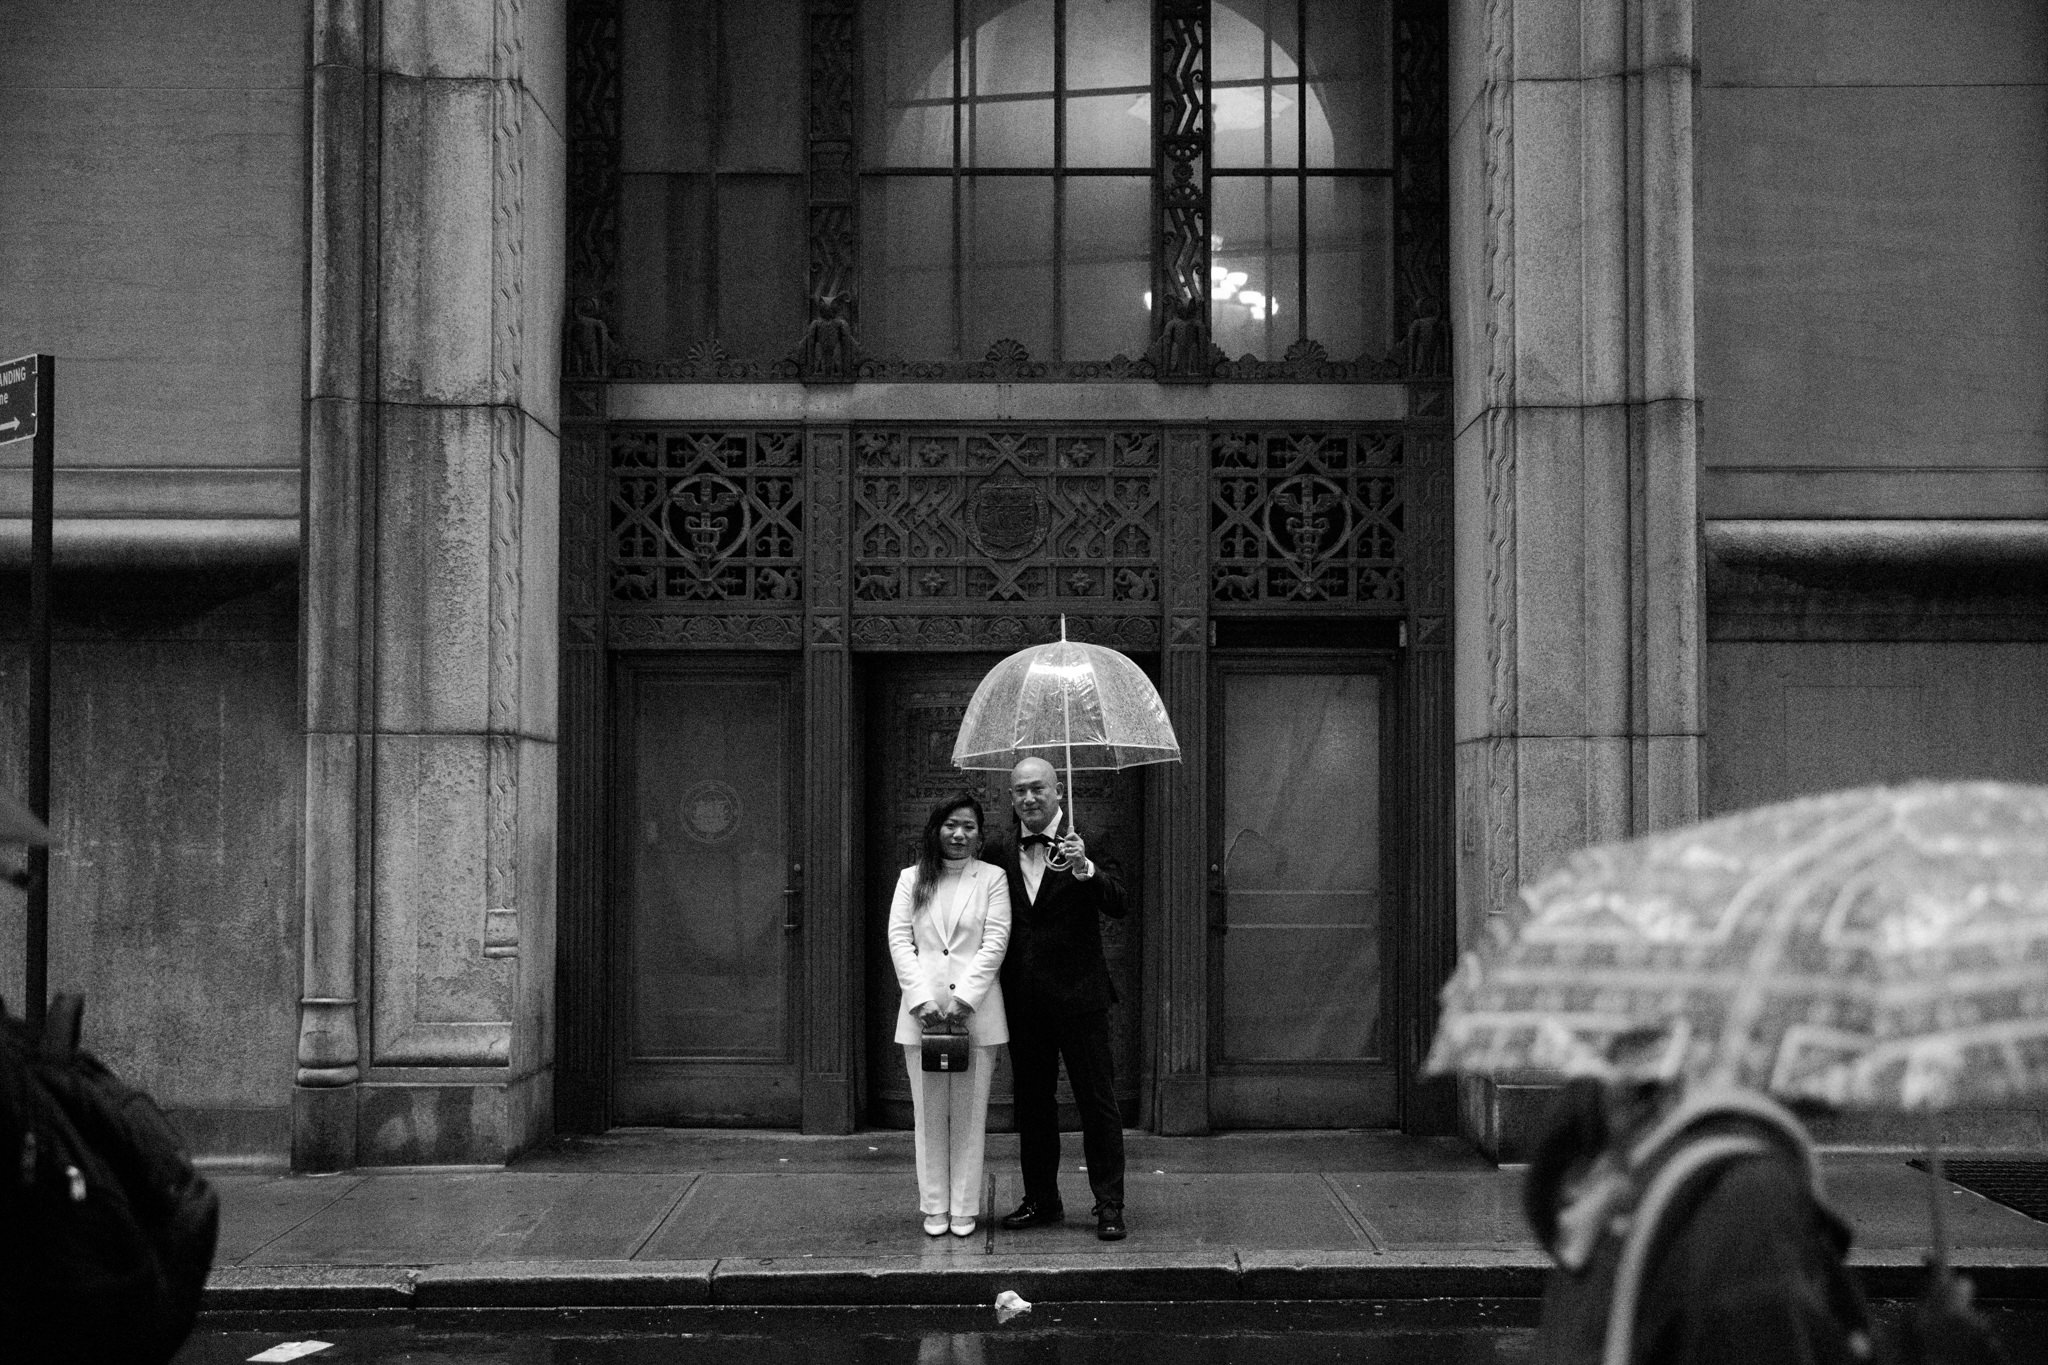 Man and wife on their wedding day under an umbrella